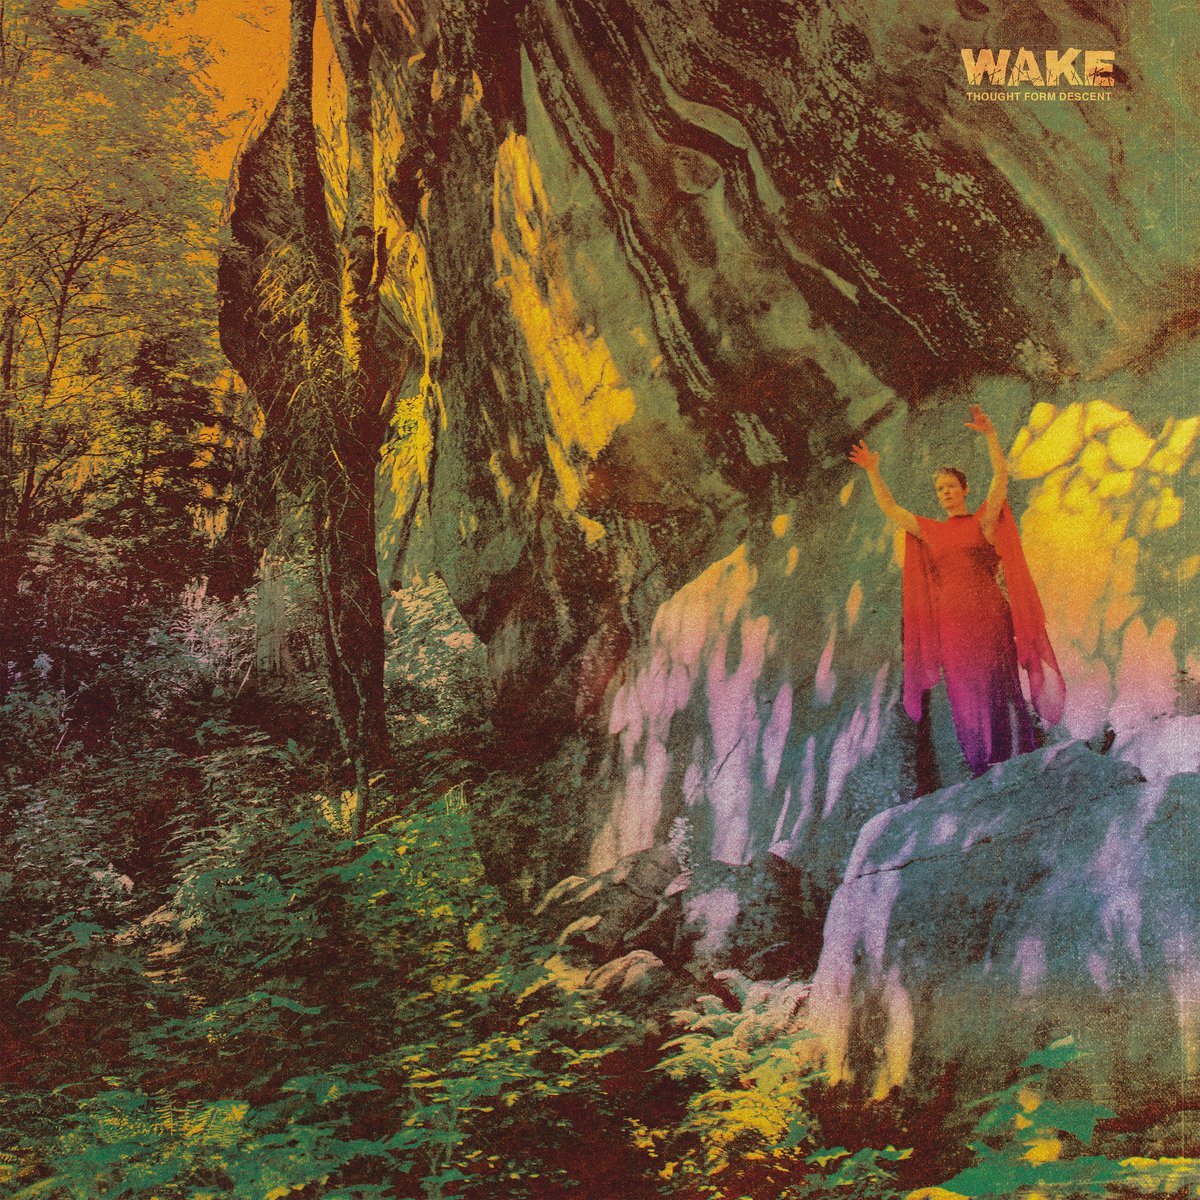 Wake - Thought Form Descent (2022) FLAC Download